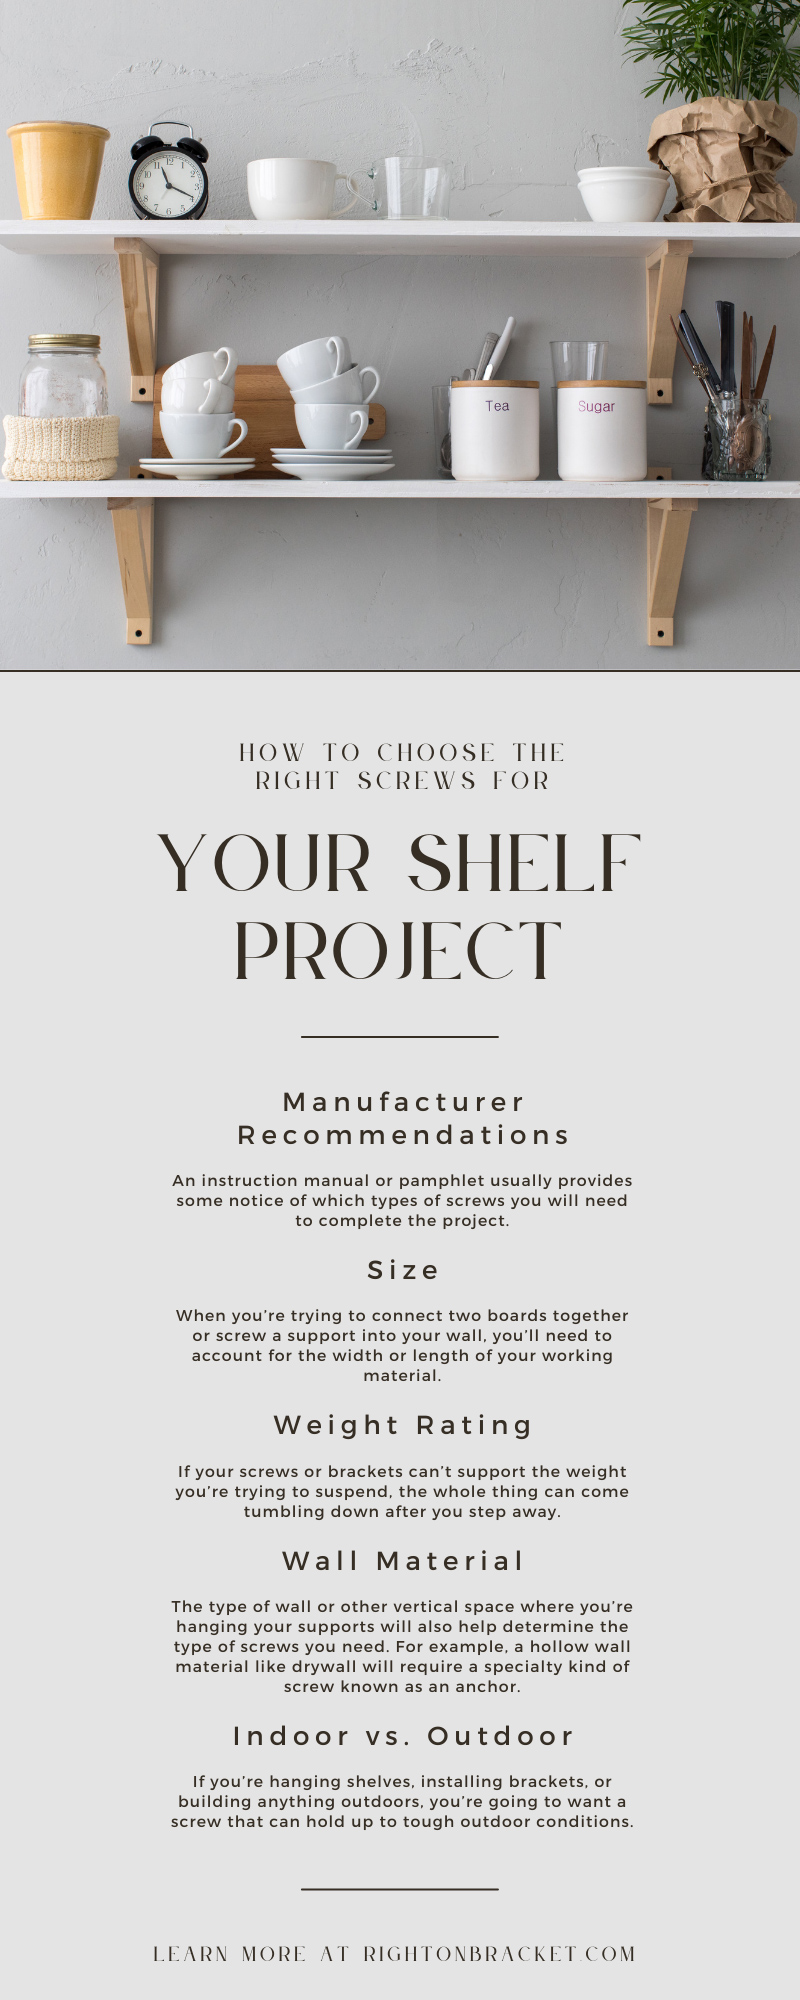 How To Choose the Right Screws for Your Shelf Project